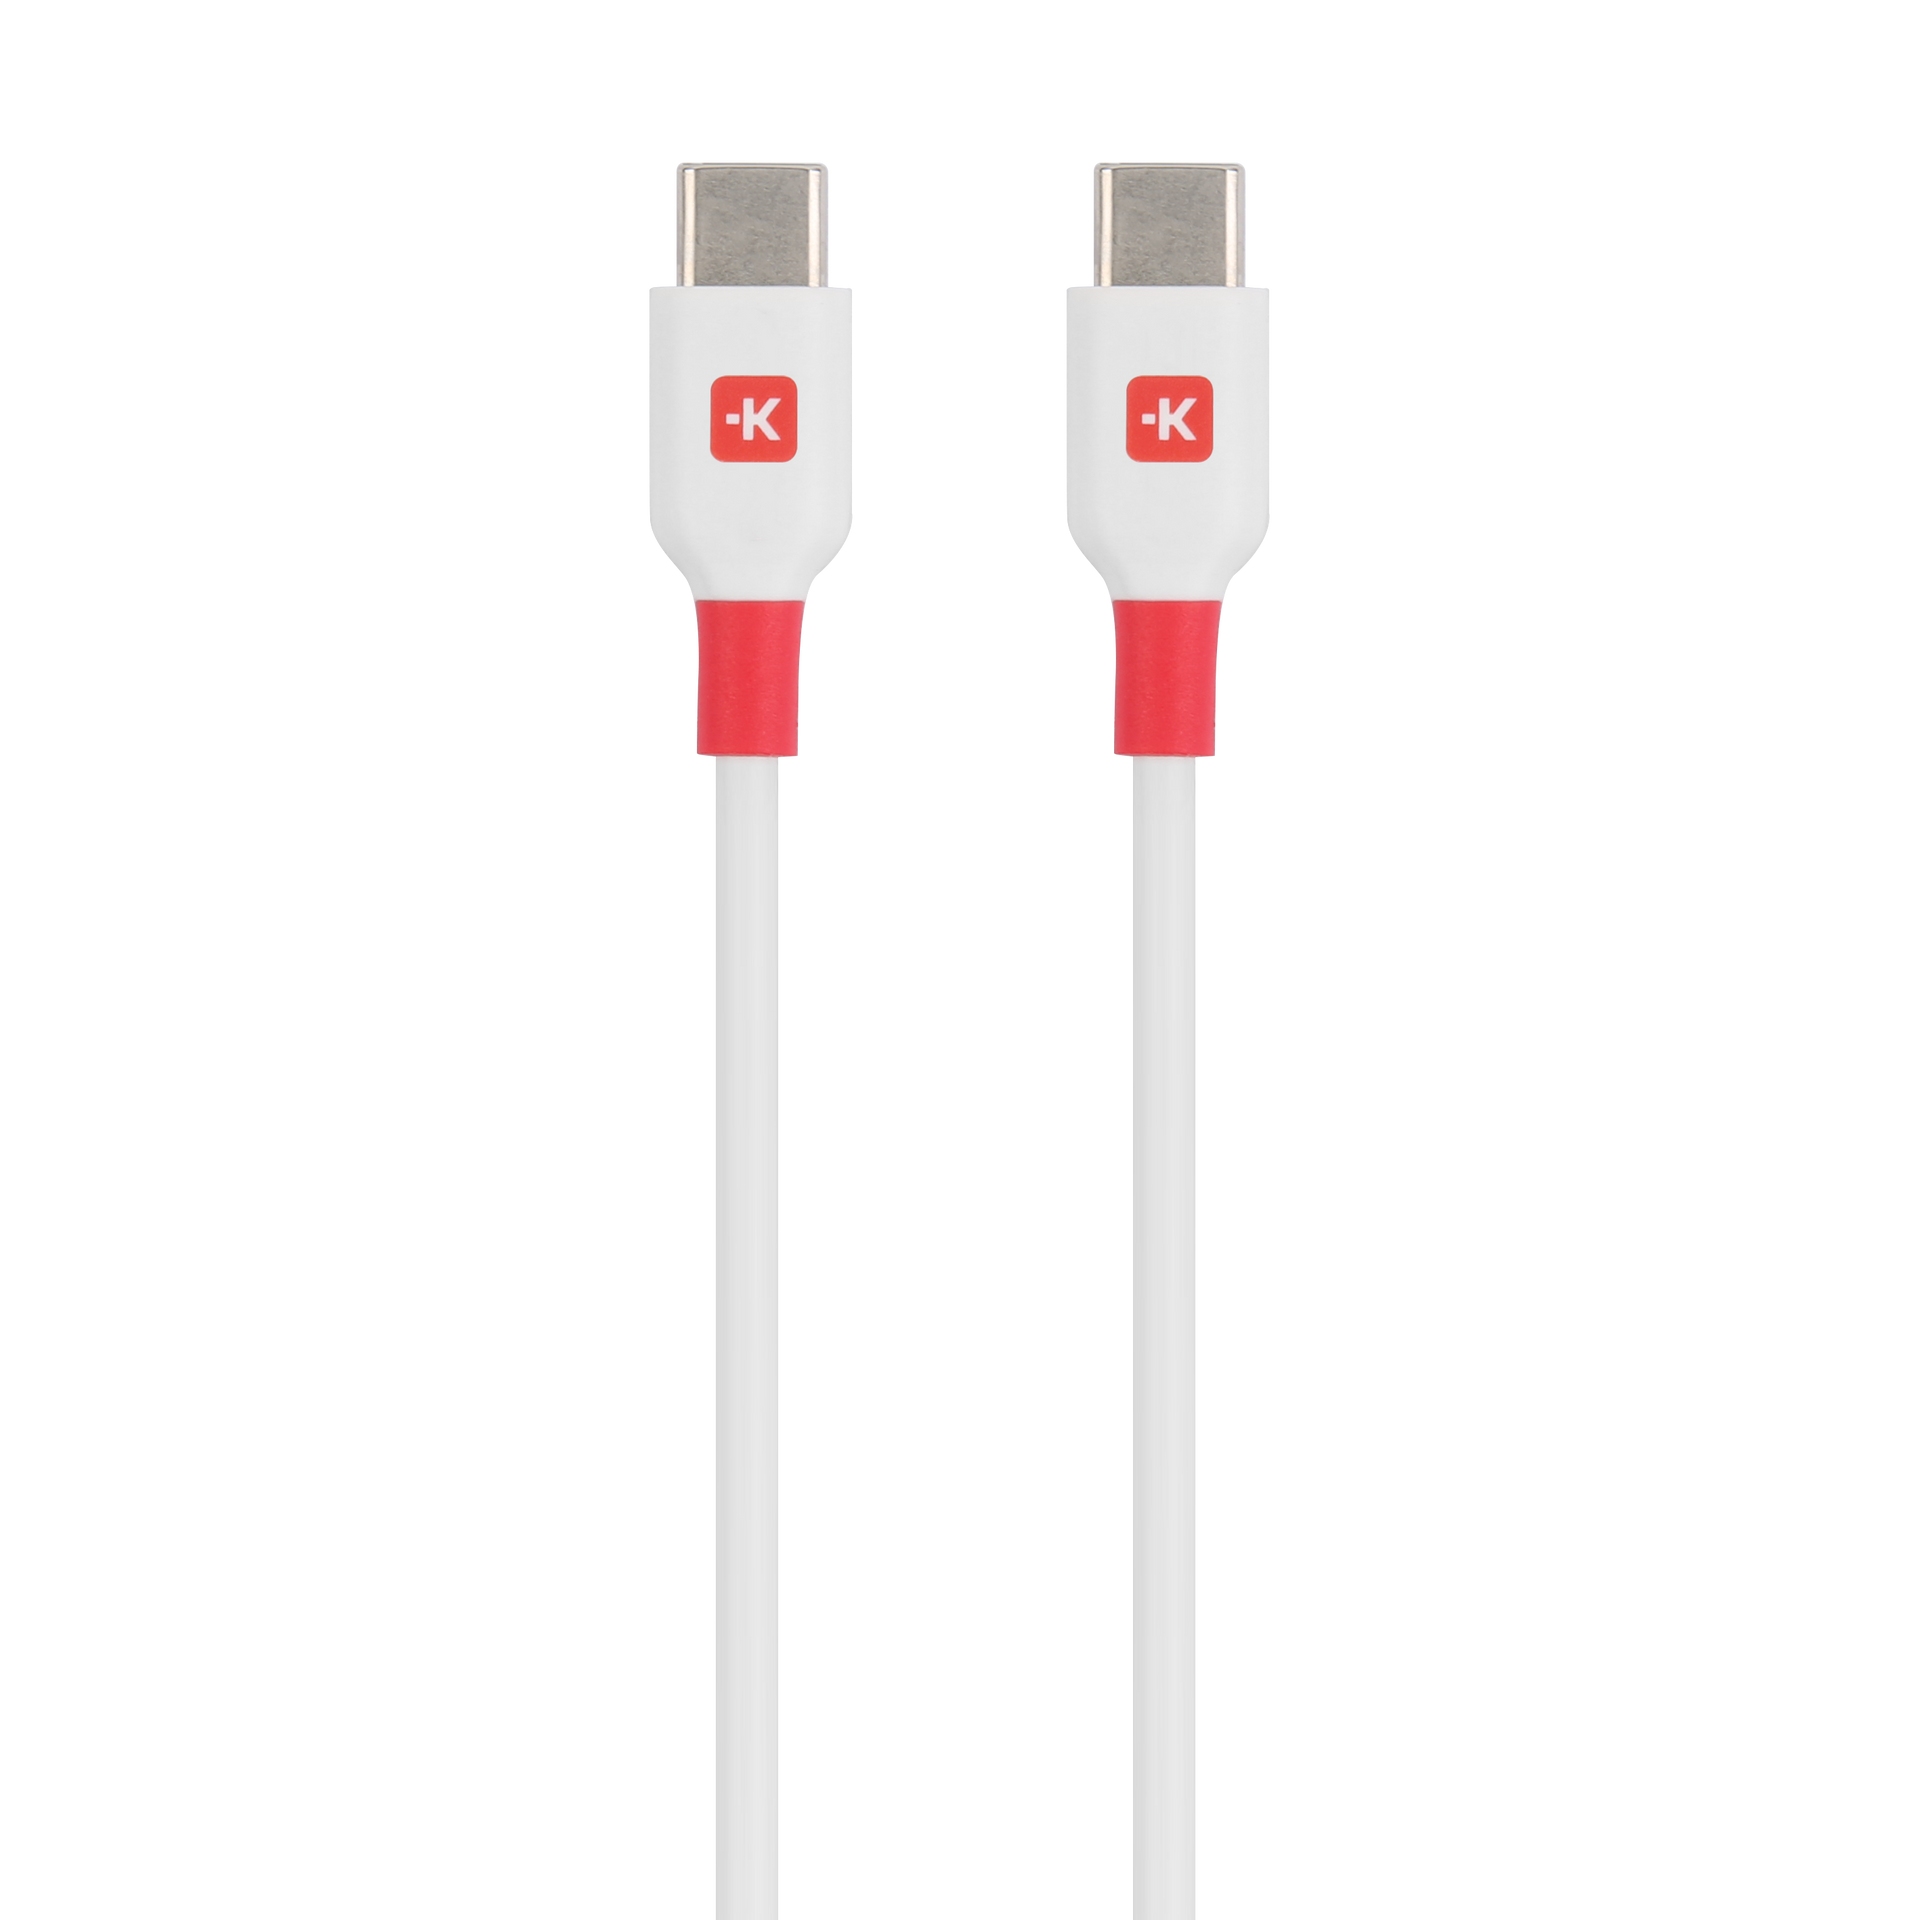 Skross USB-C to USB-C Charging Cable